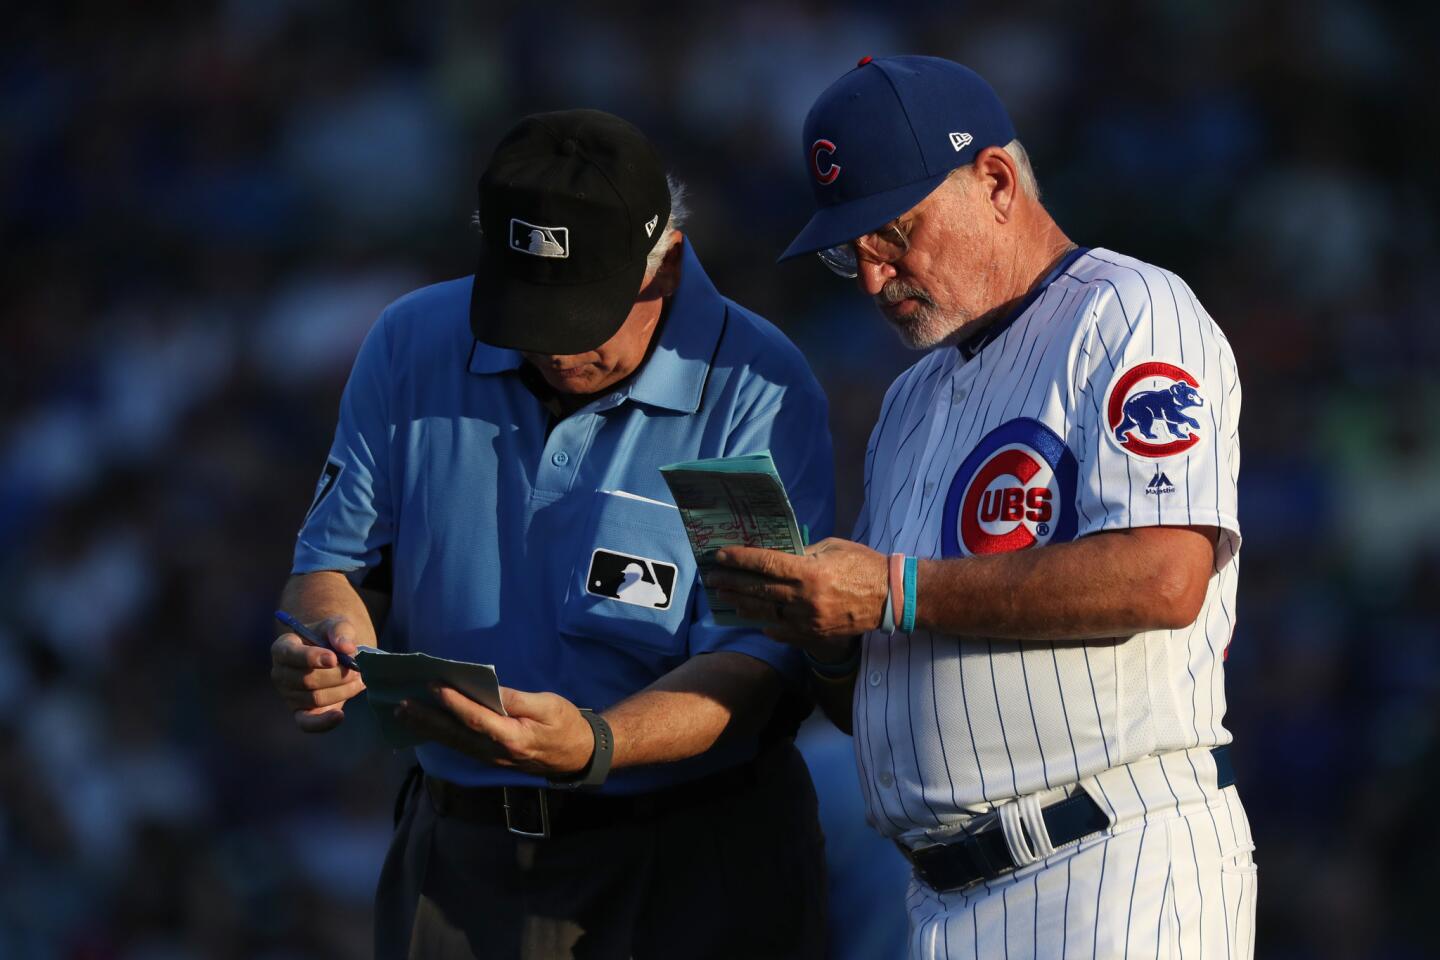 Cubs manager Joe Maddon (70) and third base umpire Larry Vanover go over lineup changes in the ninth inning against the Twins at Wrigley Field Friday, June 29, 2018.